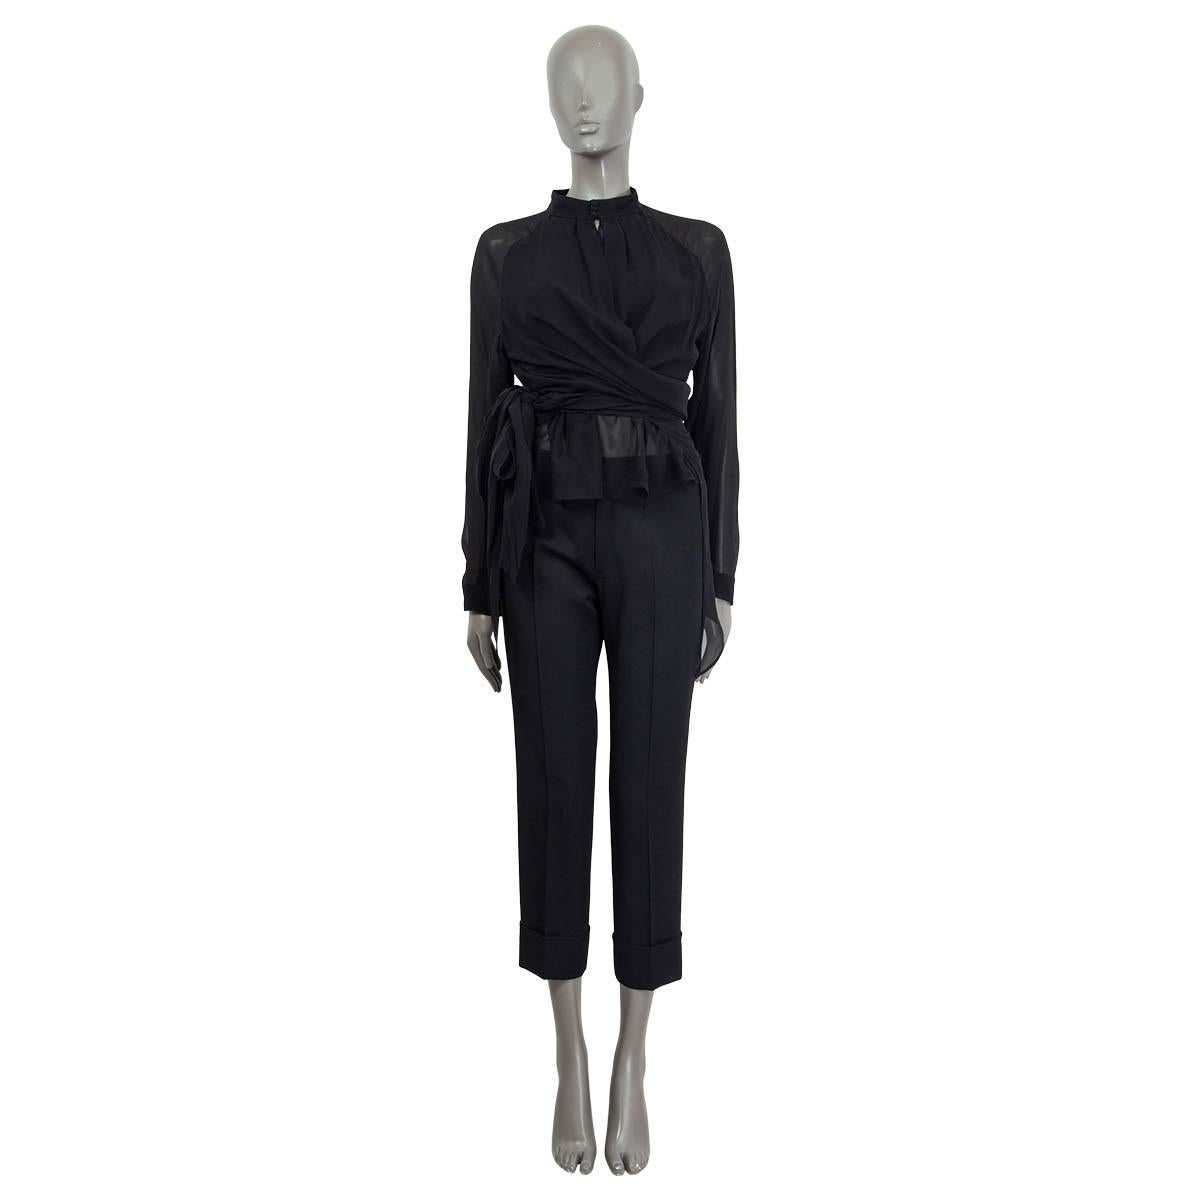 100% authentic Tom Ford knotted blouse in black silk-georgette (100%). Features buttoned cuffs, long raglan sleeves (sleeve measurements taken from the neck) and an asymmetric hem. Opens with three buttons and self-tie knot on the front. Lined in